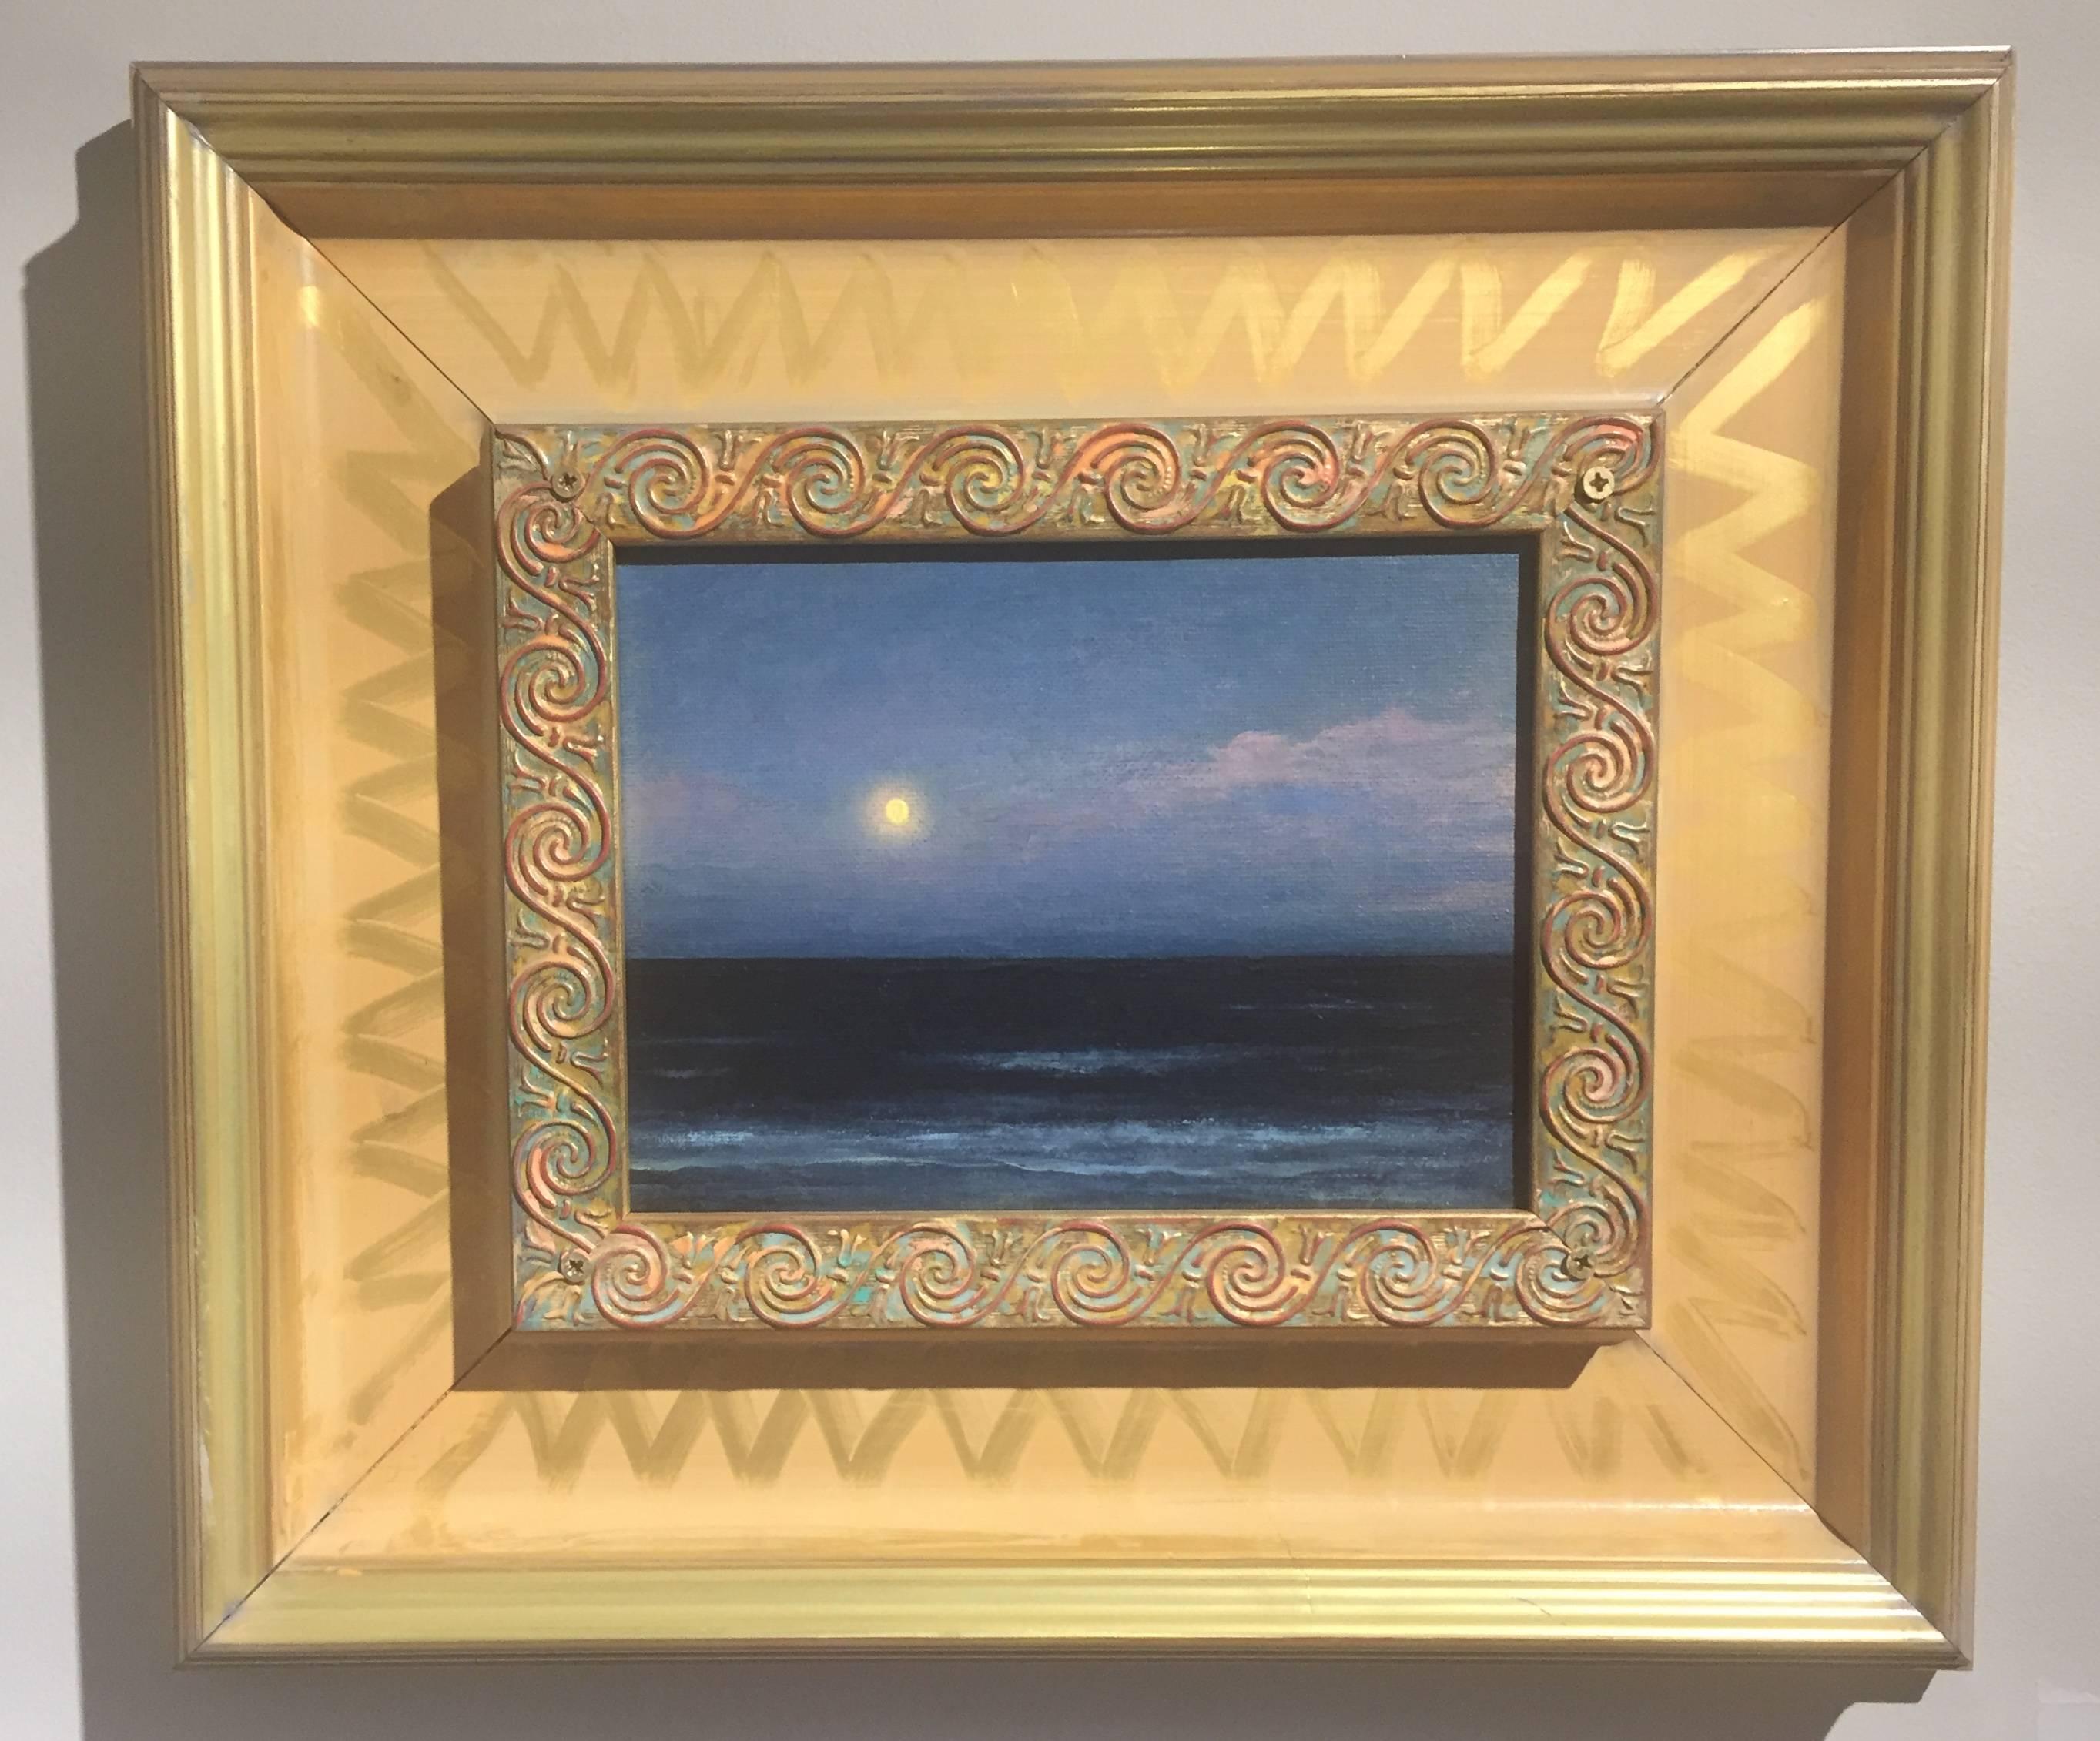 A small oil on canvas painting, depicting a seascape at night. A blue sky is illuminated by the bright, full moon. The deep, mysterious ocean is painted with a dark, rich blue, almost black at the horizon. A romantic and pensive scene.

Adam Straus